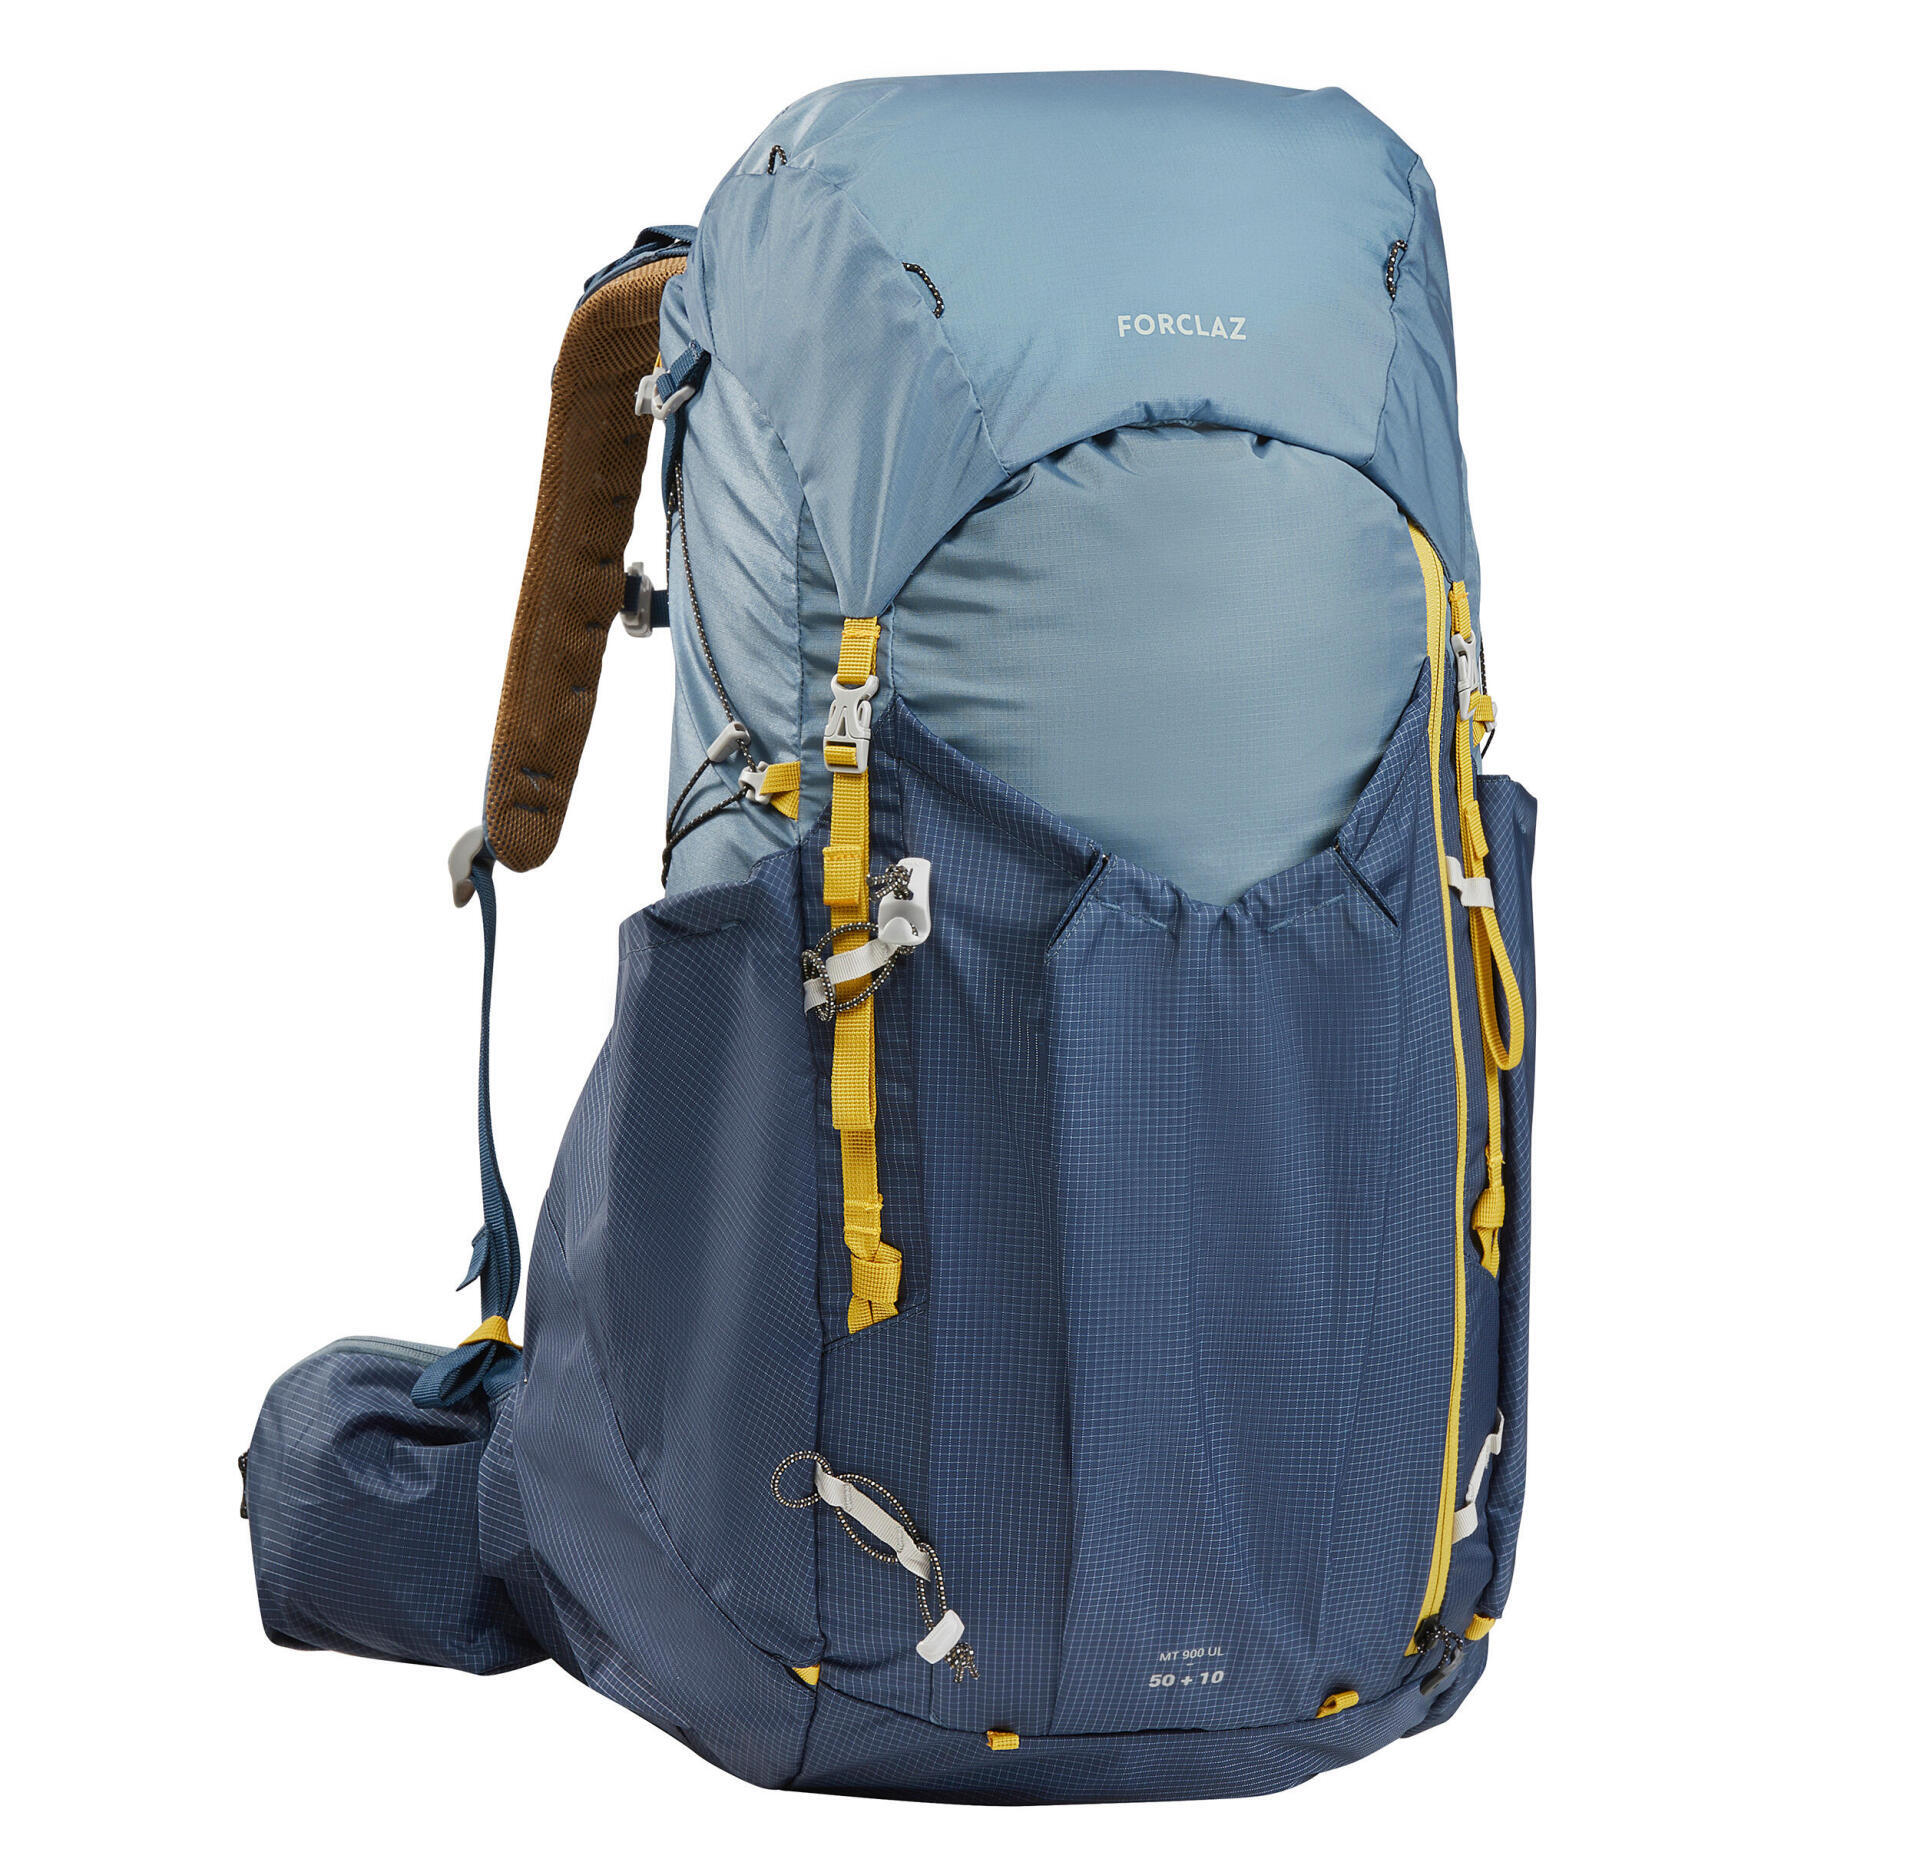 How to choose your hiking backpack?